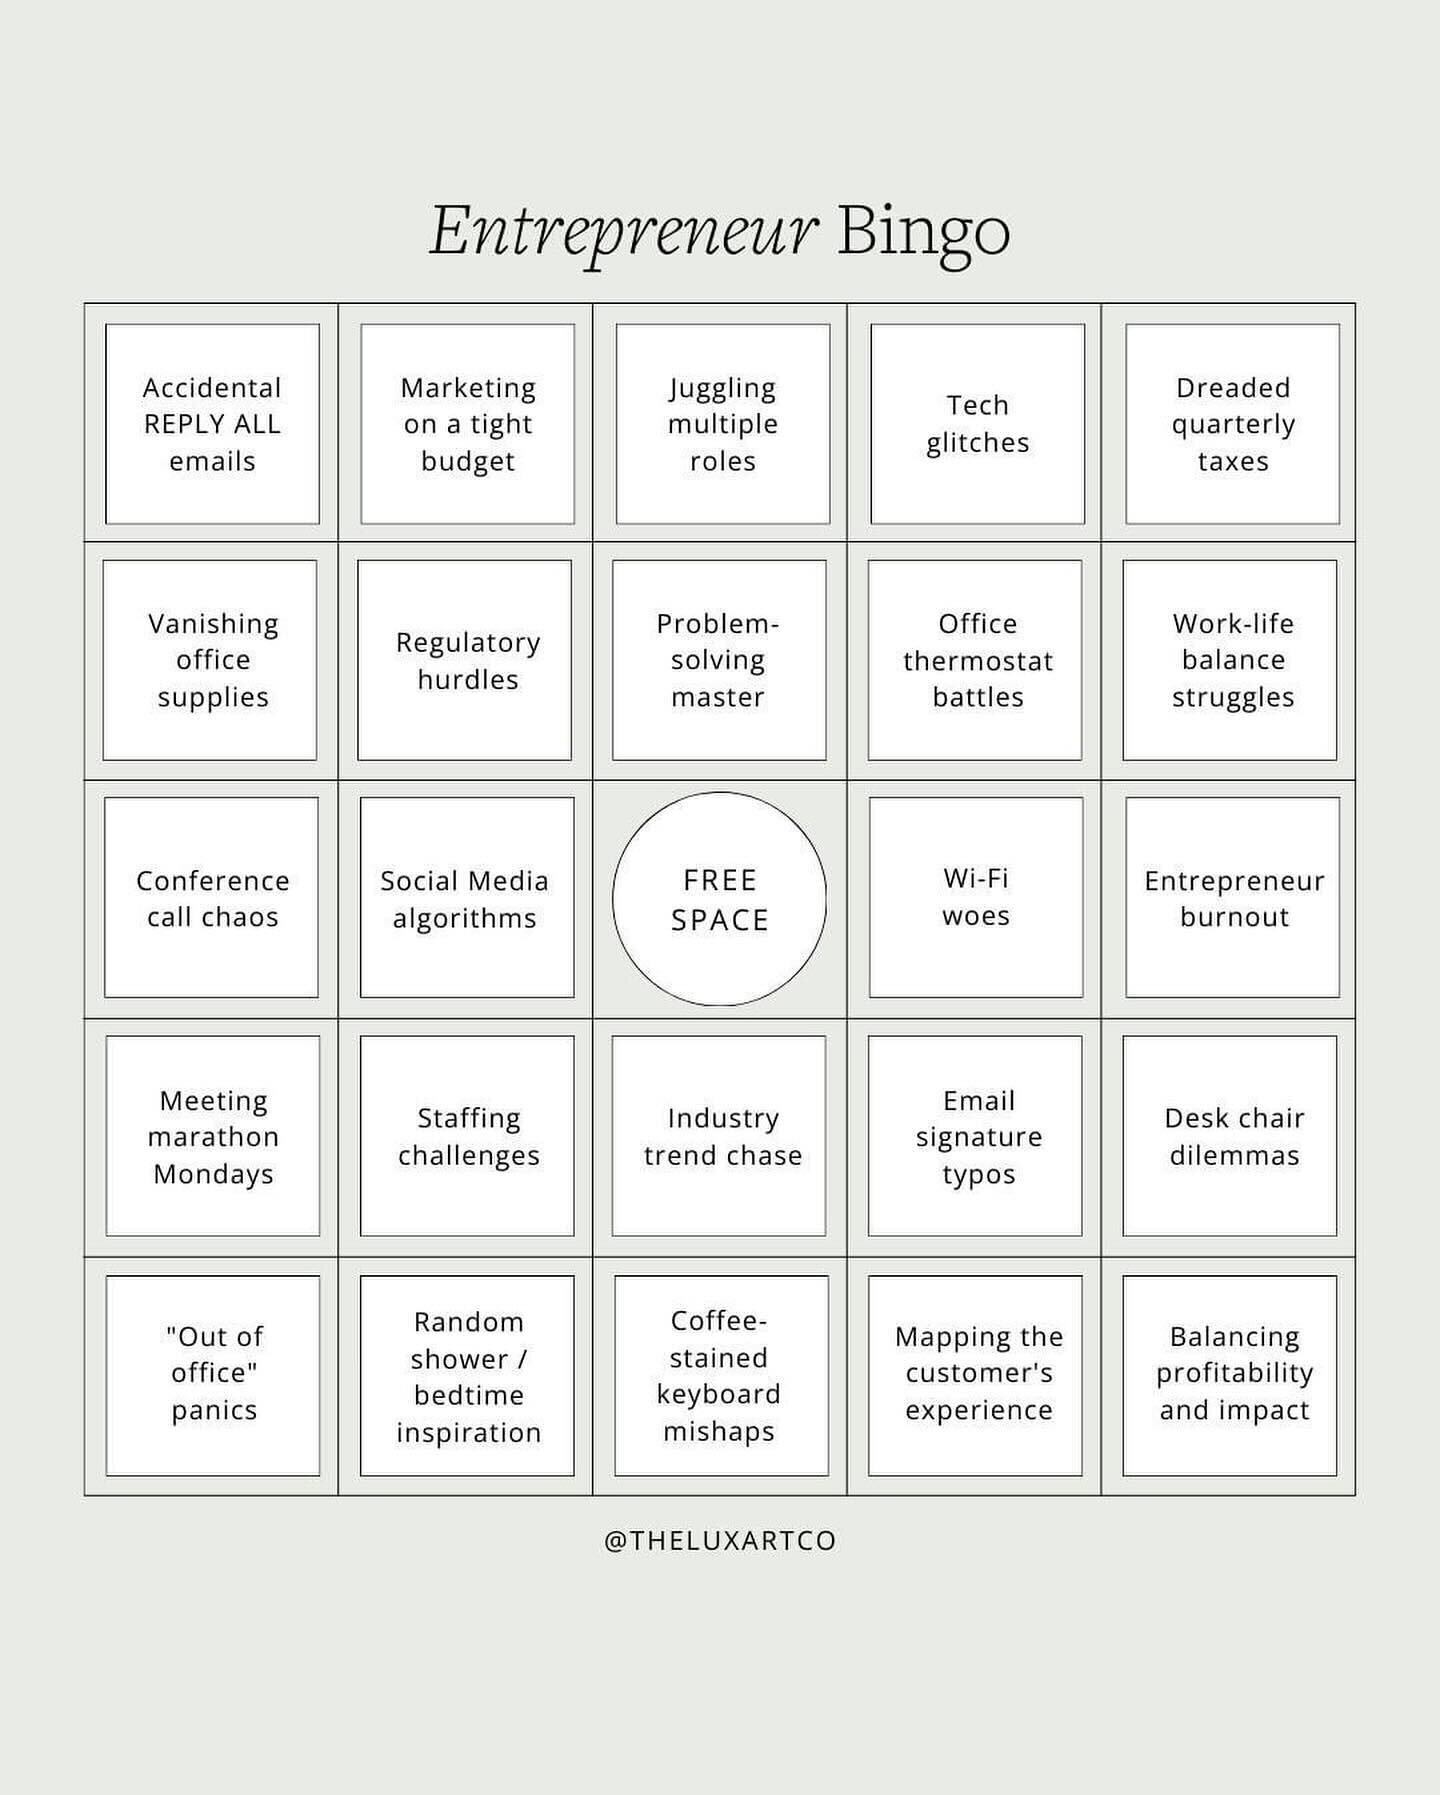 Ready to play Entrepreneur Bingo? 🎲🚀 How many bingos will you get? 🤪🤔

Being an entrepreneur is like riding a rollercoaster&mdash;full of highs, lows, and unexpected twists. The good news, you&rsquo;re not alone on this wild ride! Our bingo game 